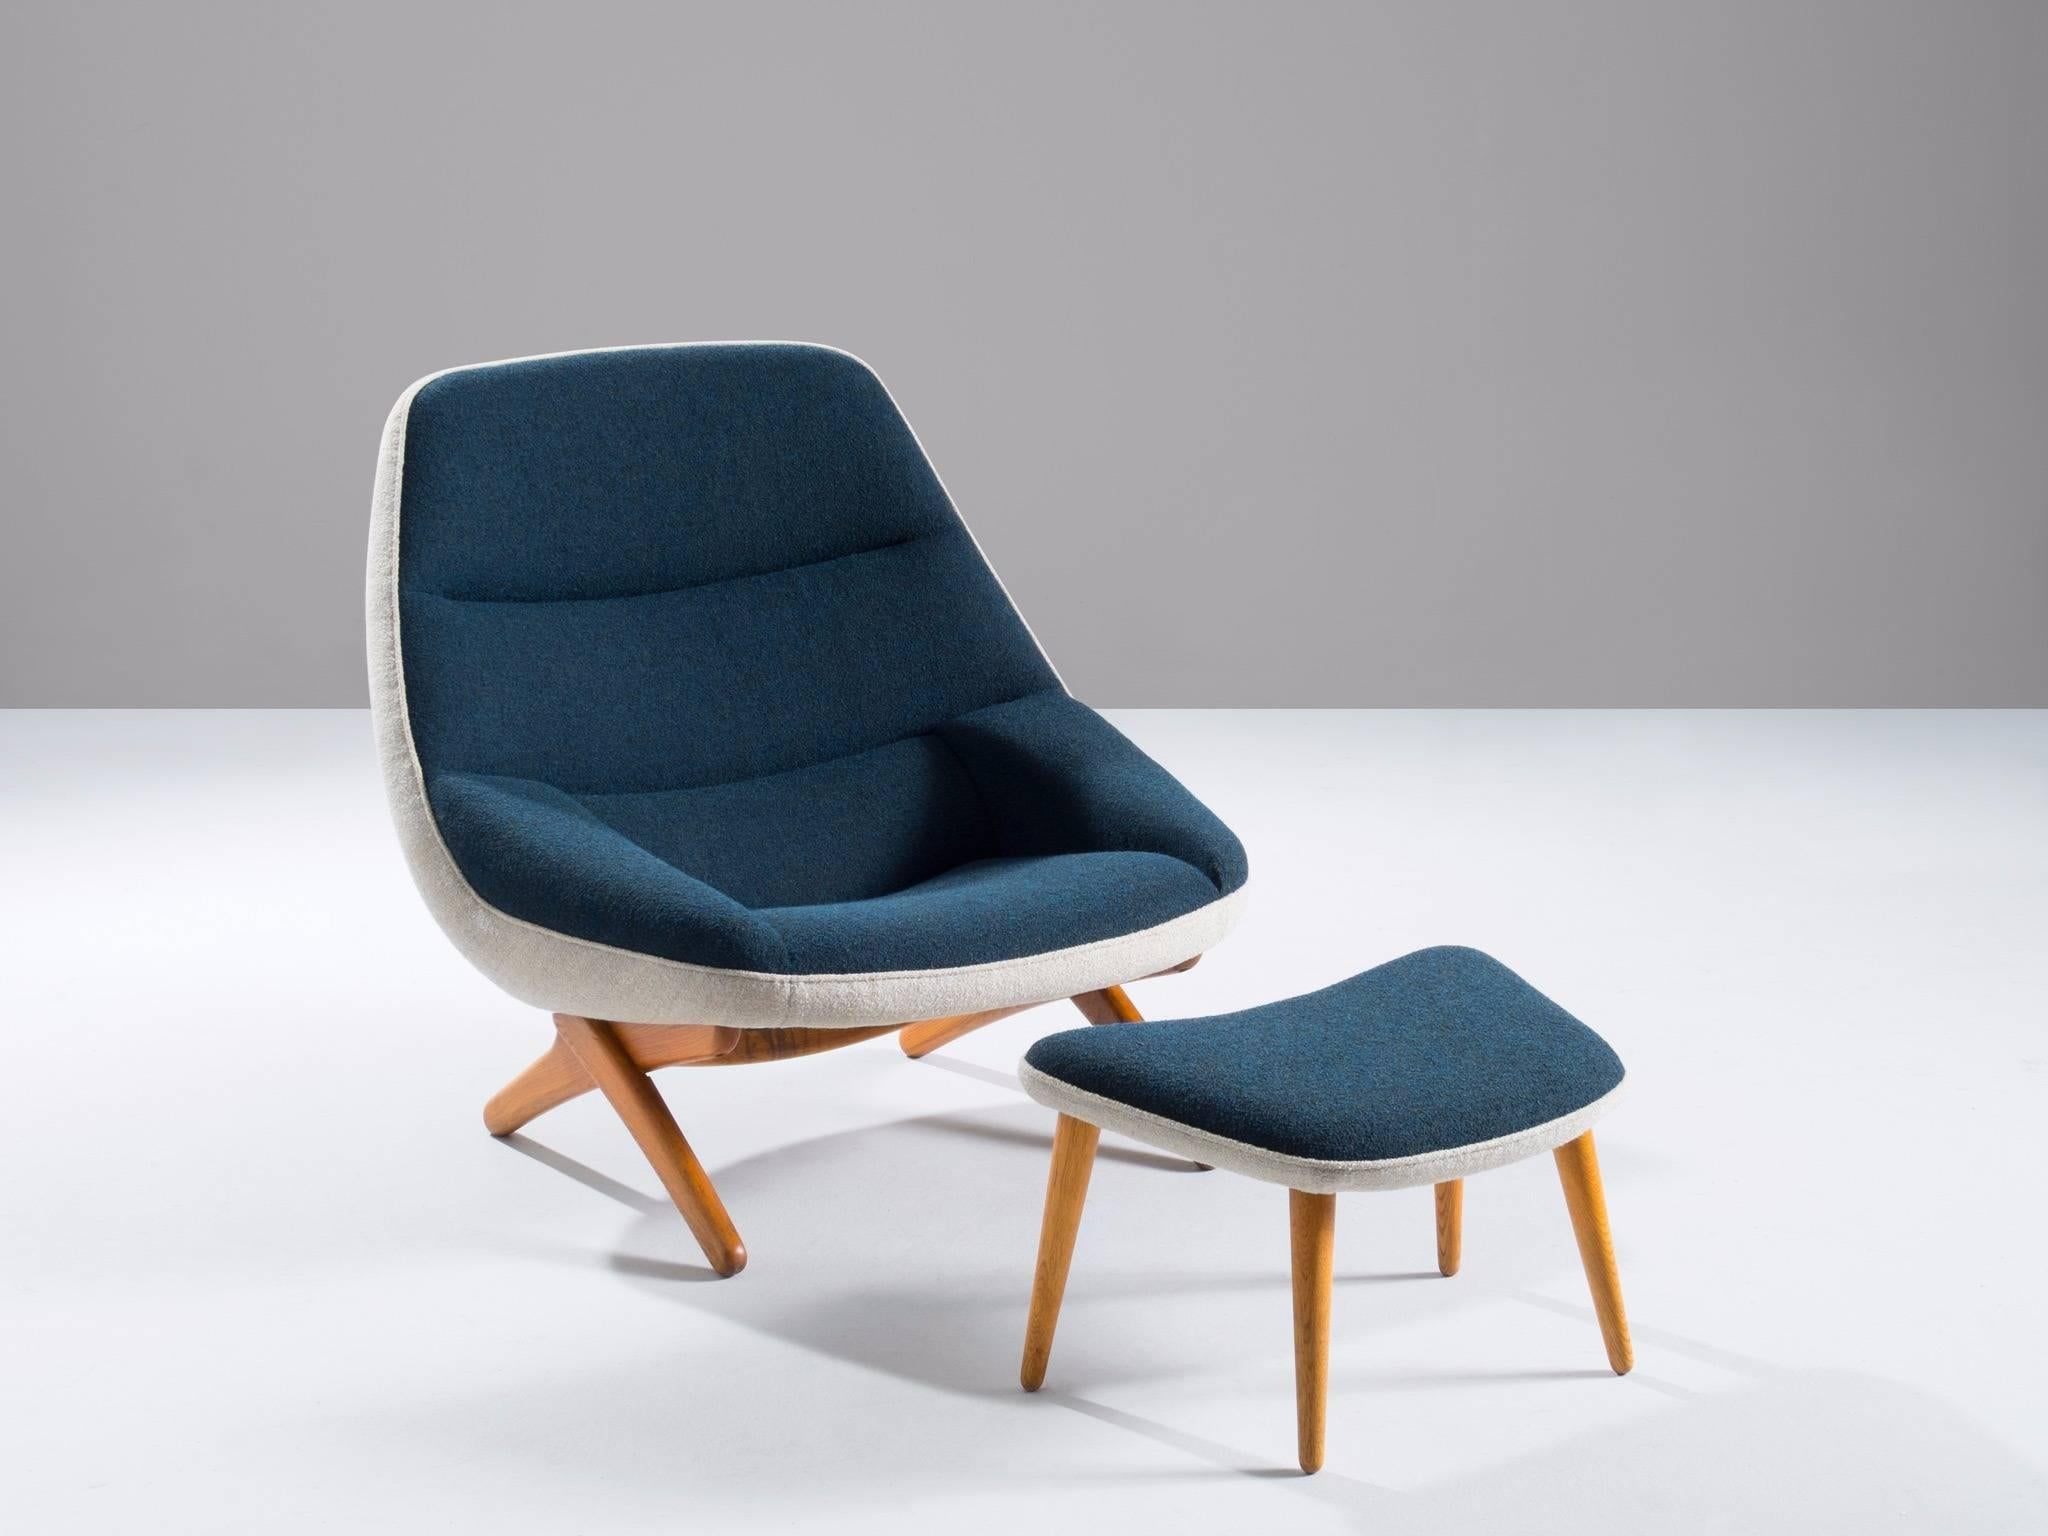 Illum Wikkelsø, lounge chair and ottoman in fabric and oak, Denmark, 1960s. Completely restored and reupholstered in a Kvadrat outback duotone combination.

This ML 91 model lounge chair was designed by Illum Wikkelsø and manufactured by Mikael